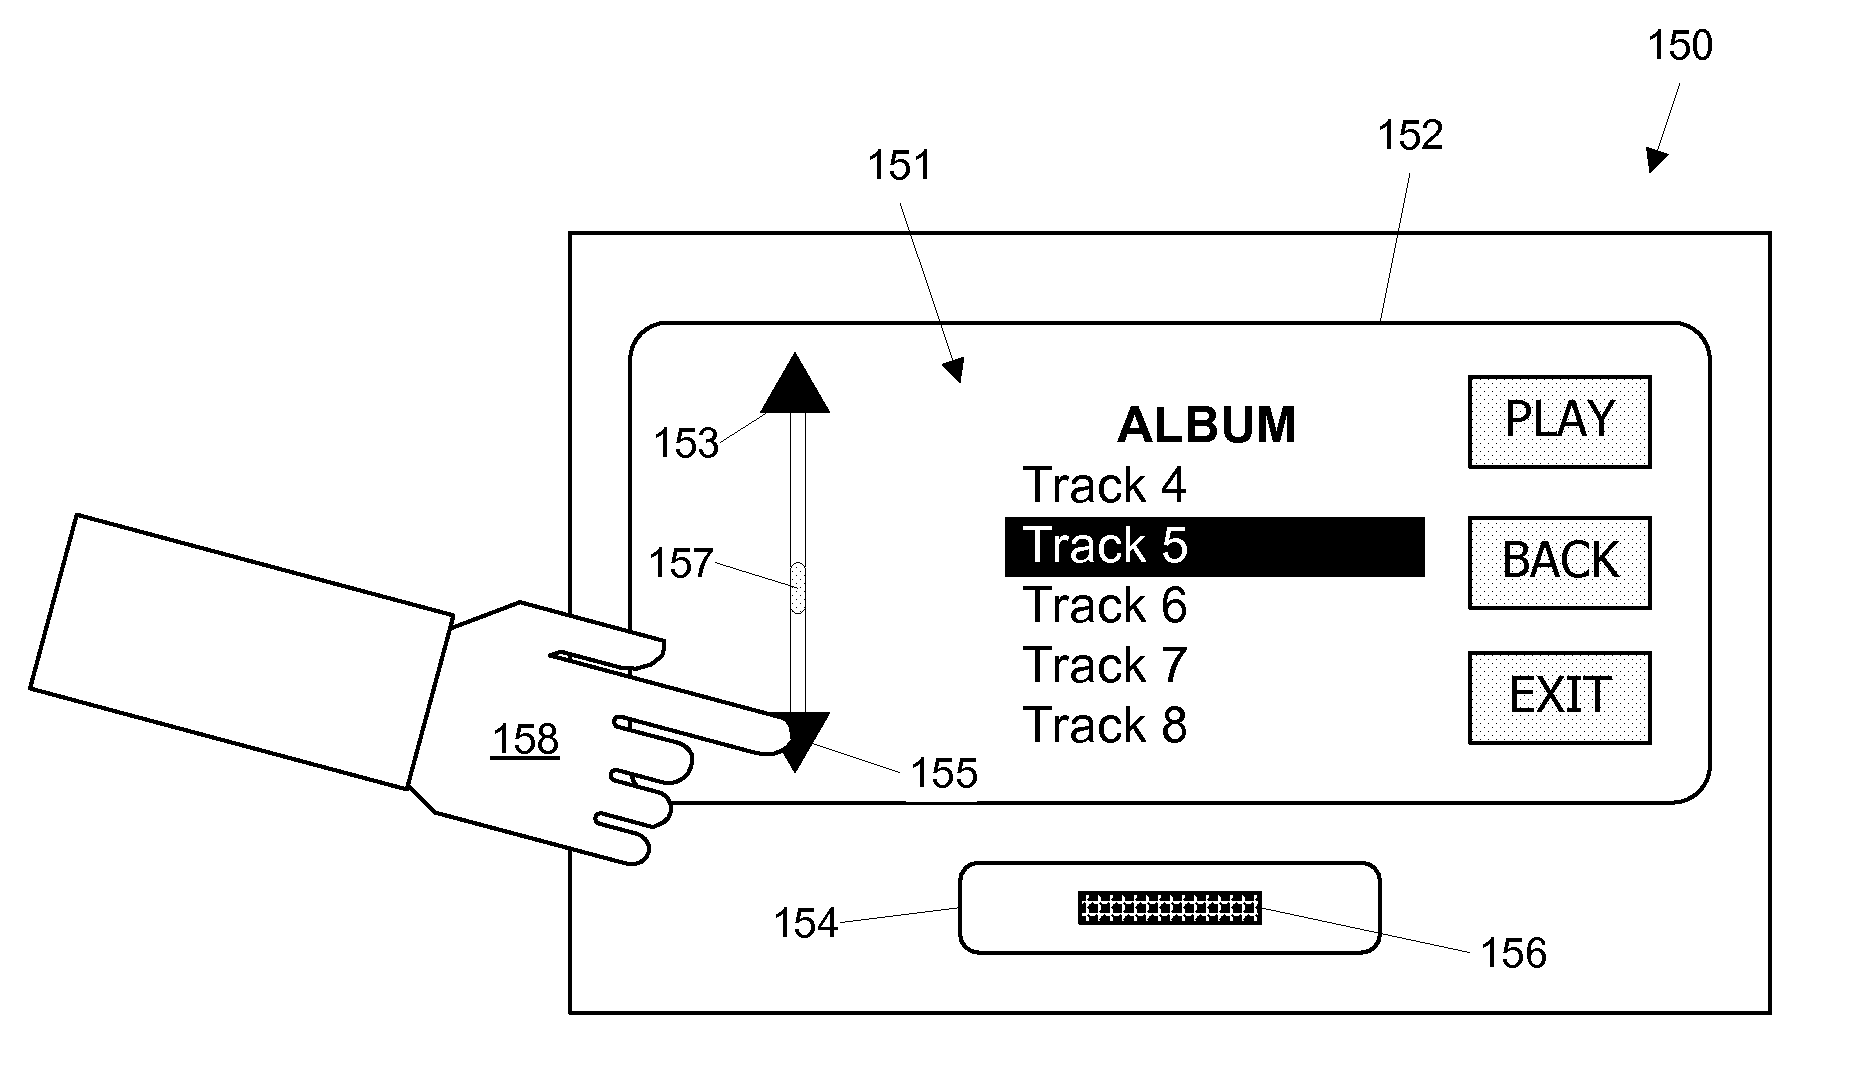 Pushing a user interface to a remote device